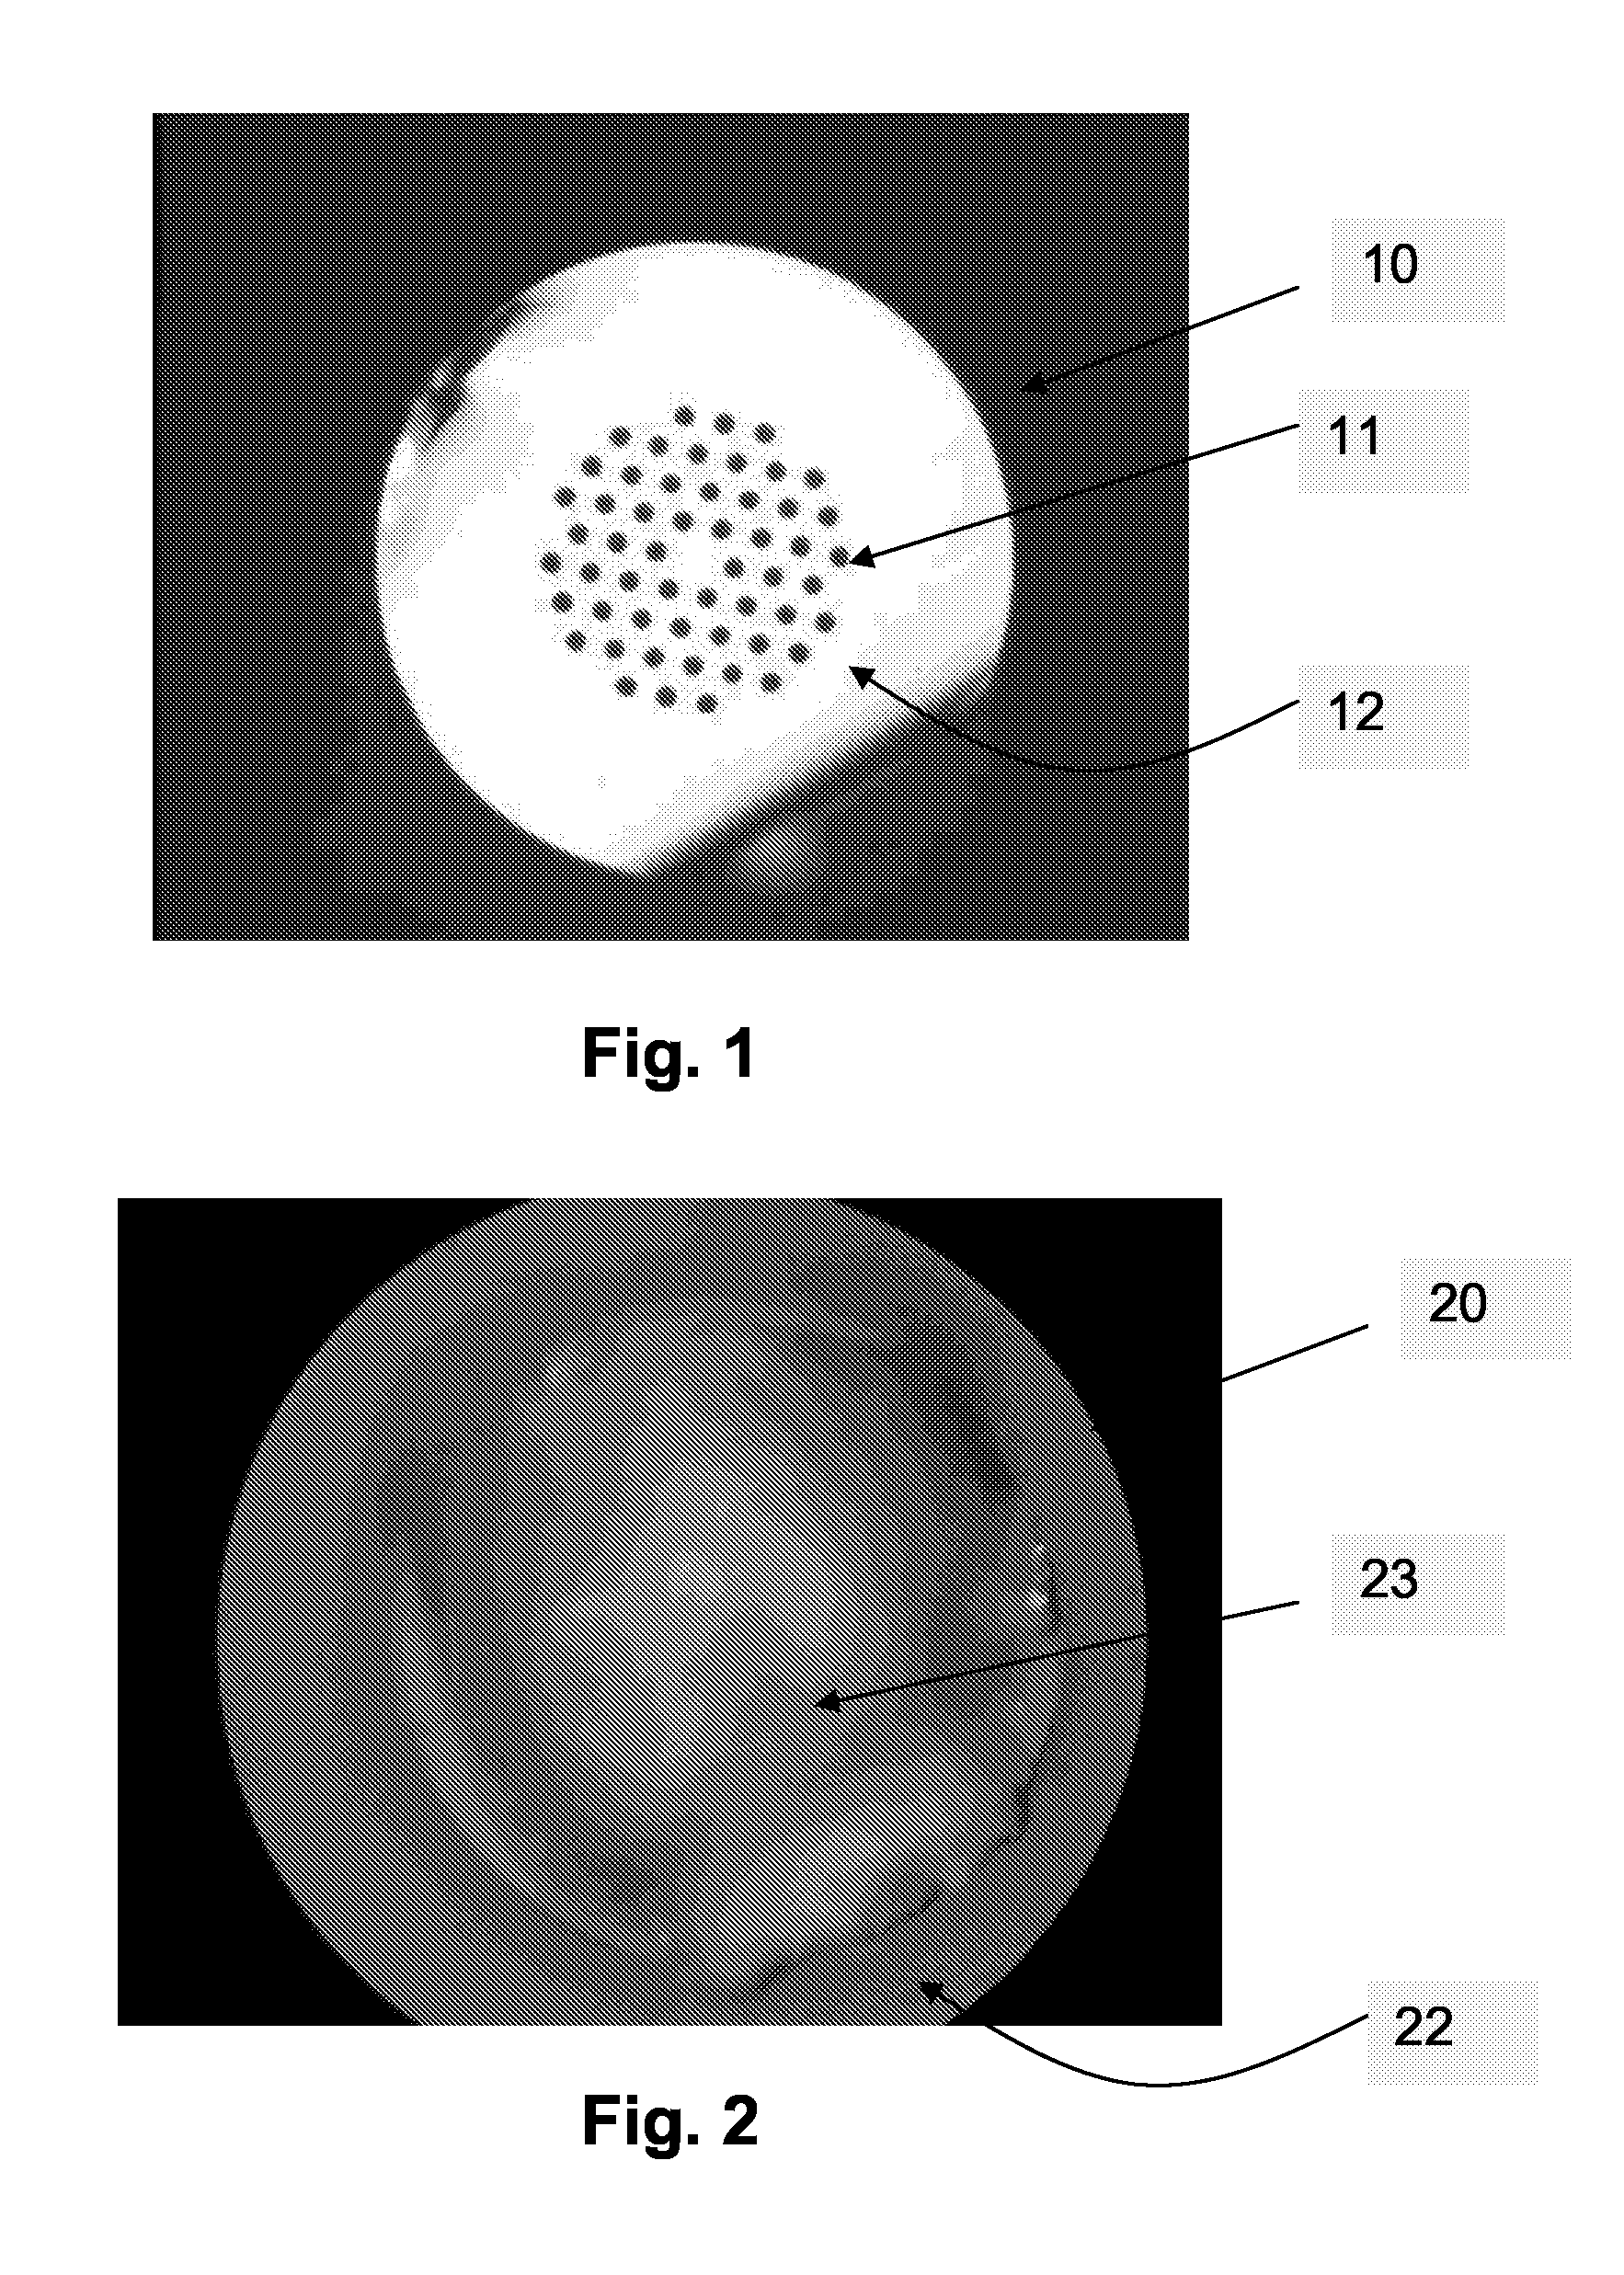 Method of inducing refractive index structures in a micro-structured fiber, a micro-structured fiber and an article